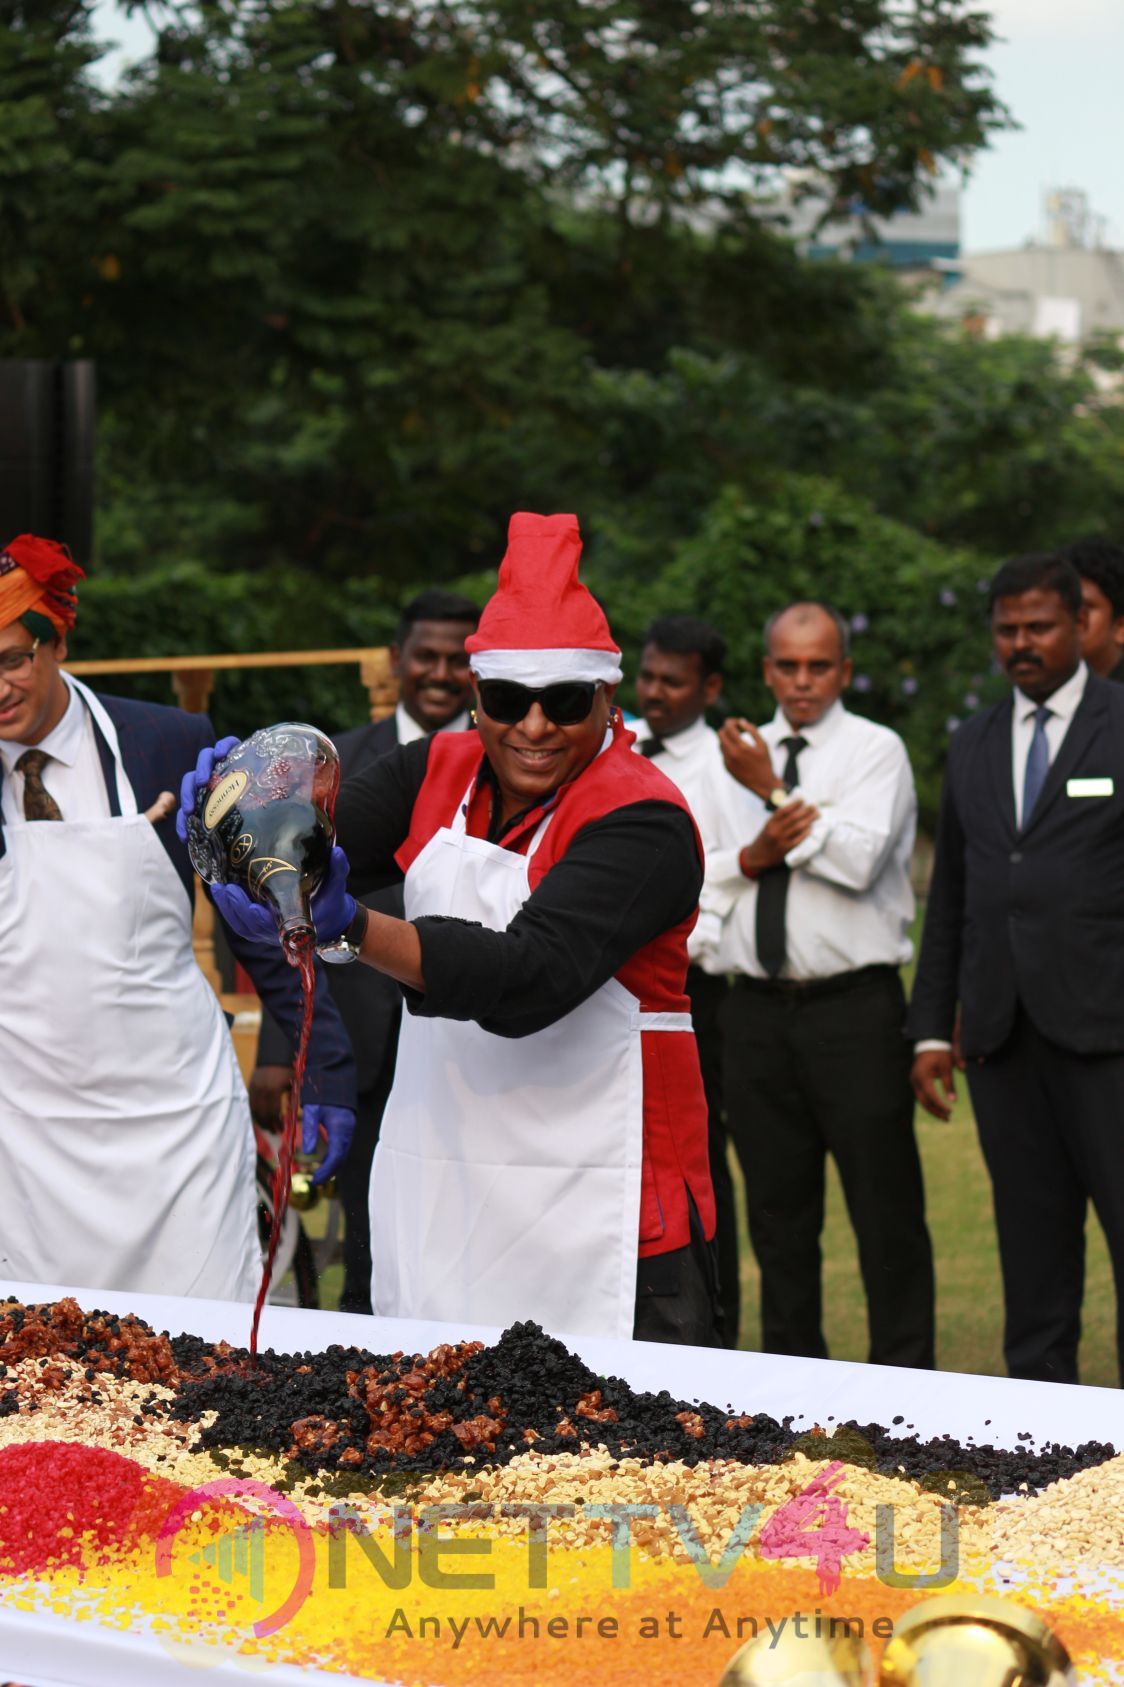 Hotel Green Park Christmas Cake Mixing Ceremony 2018 Photos Tamil Gallery